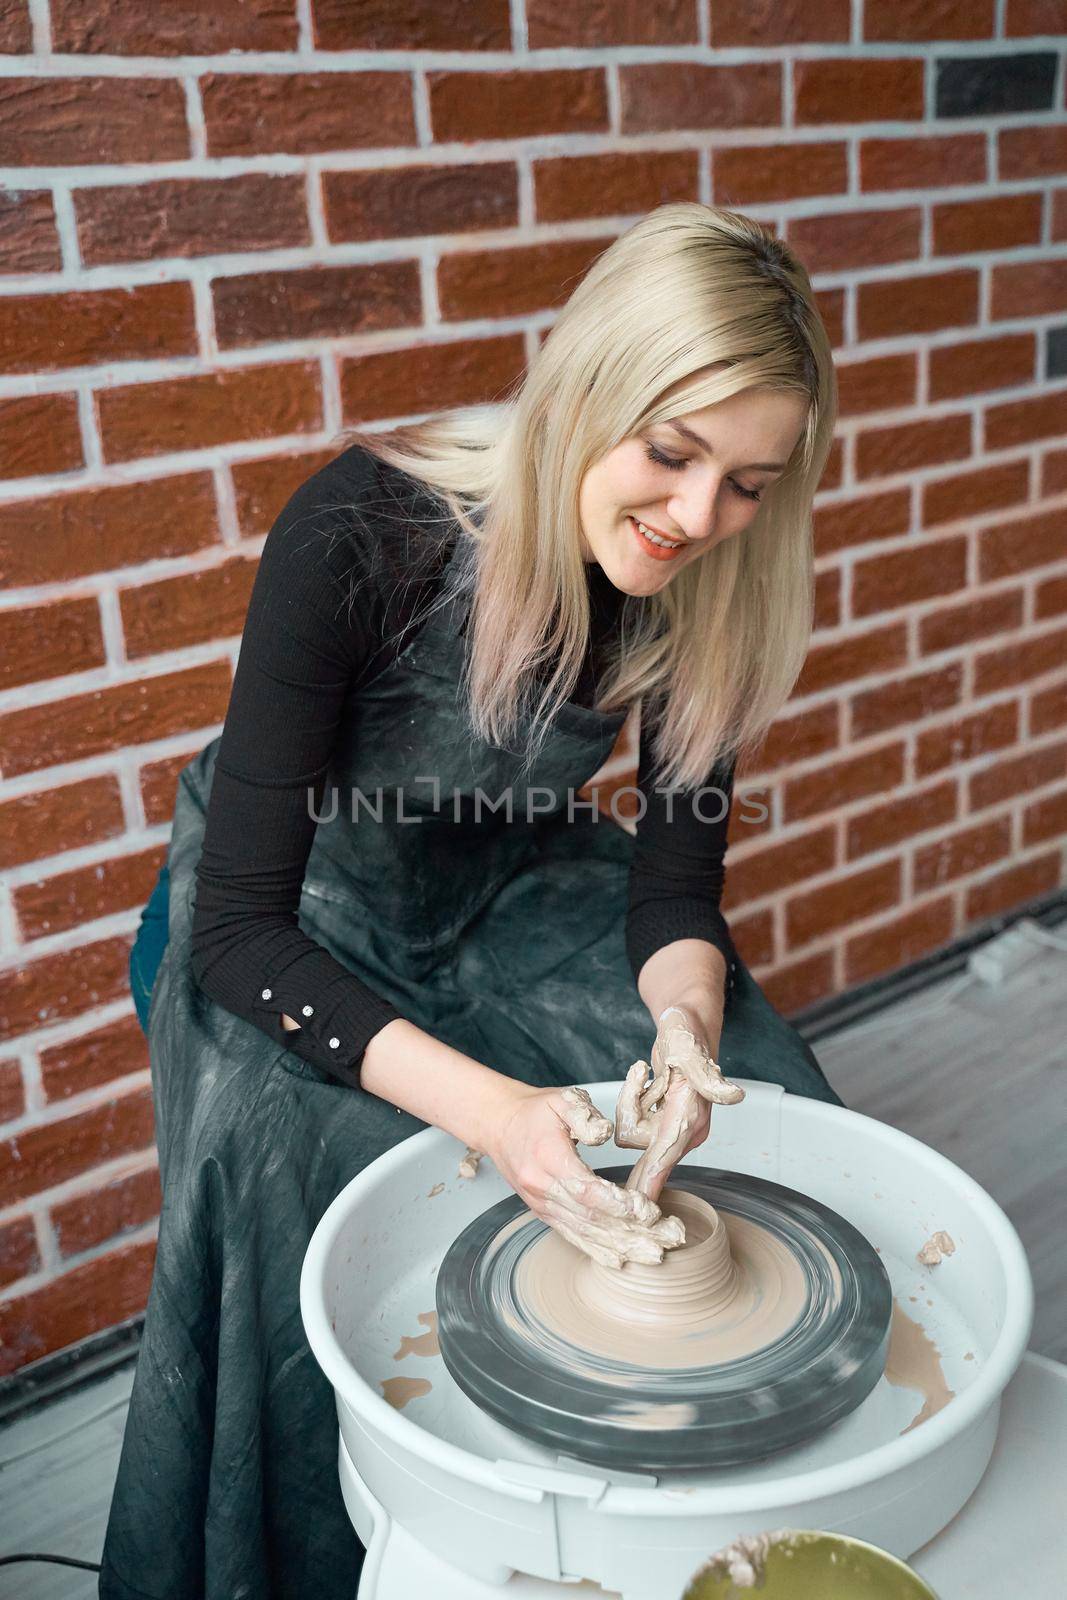 Happy woman making ceramic pottery on wheel. Concept for woman in freelance, business, hobby. Earn extra money, turning hobbies into cash and passion into a job. Beautiful female smiling